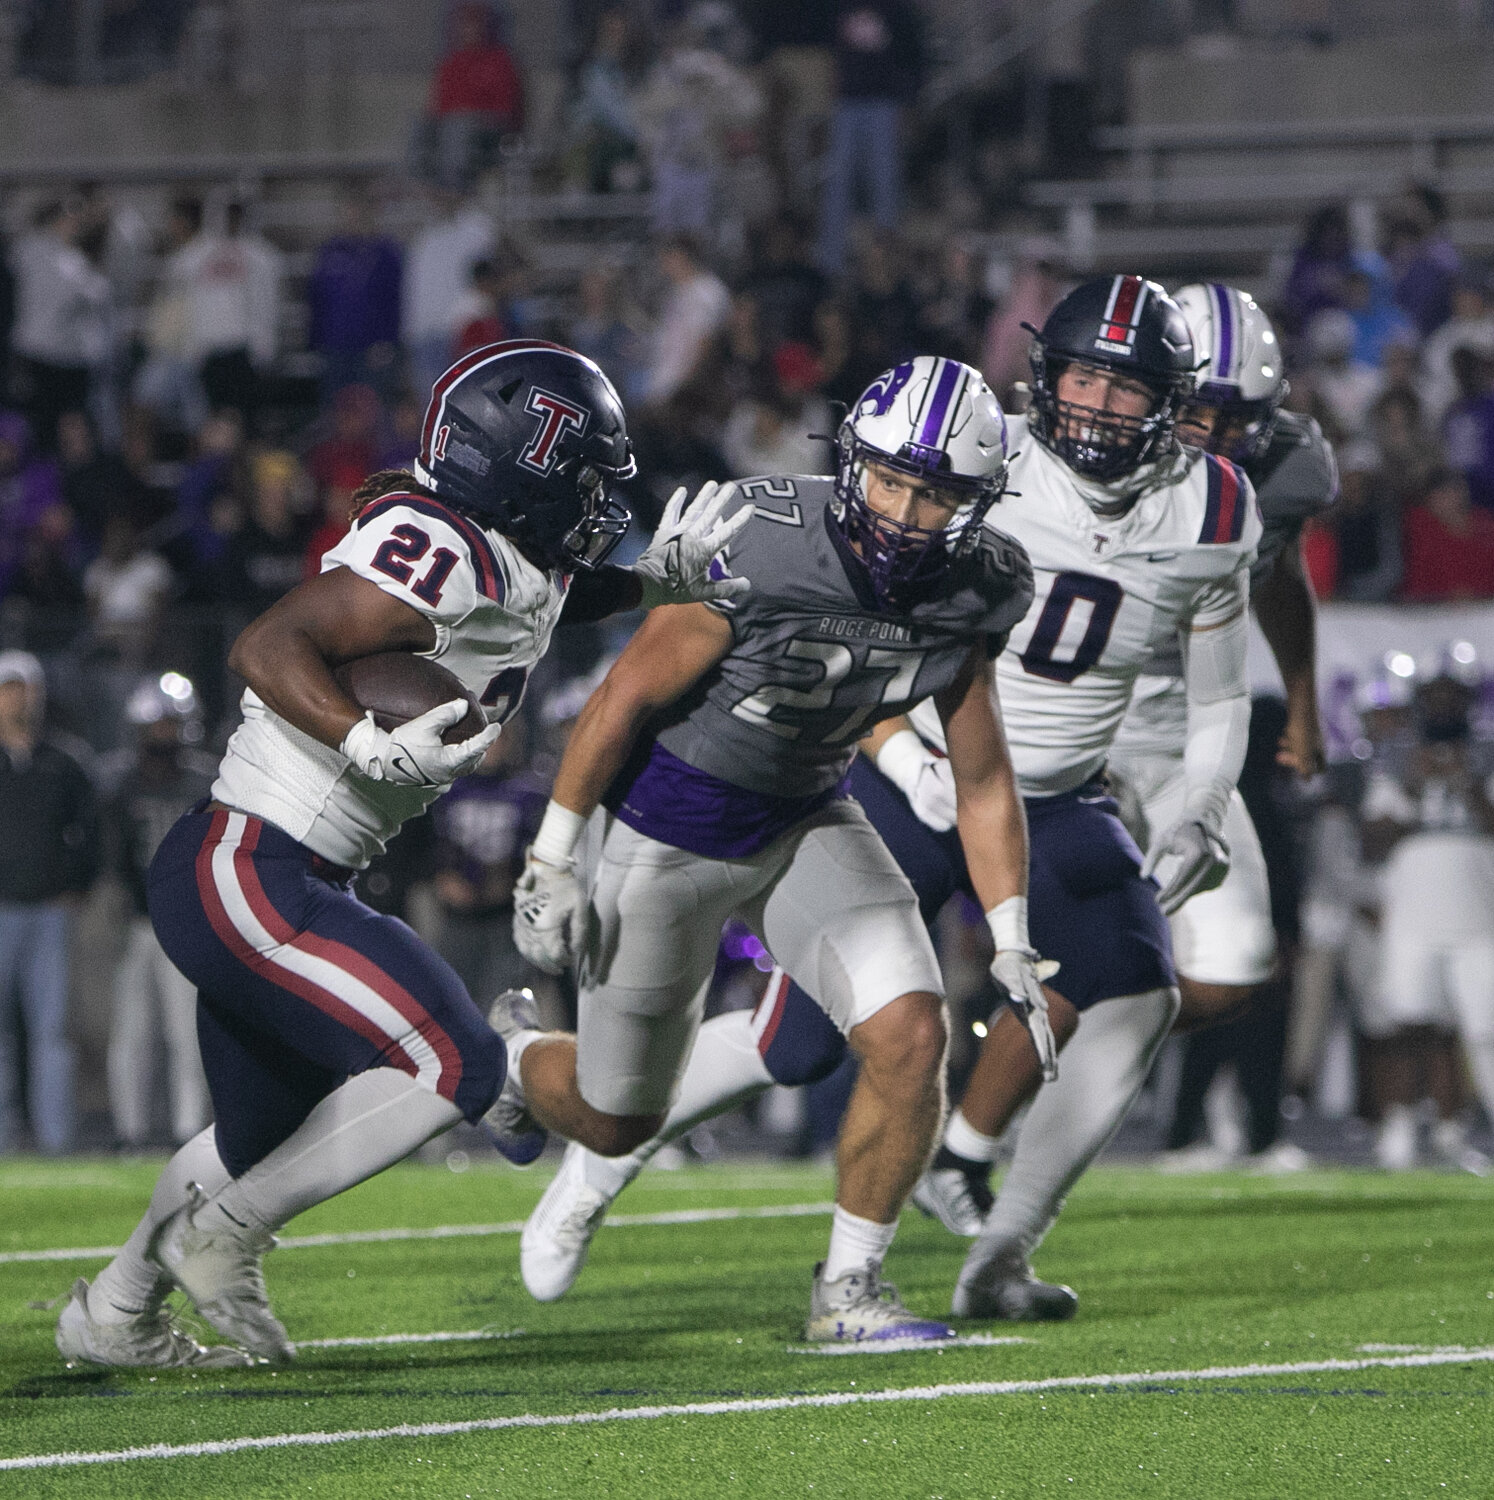 Caleb Blocker stiff arms a defender during Friday's game between Tompkins and Ridge Point at Hall Stadium.